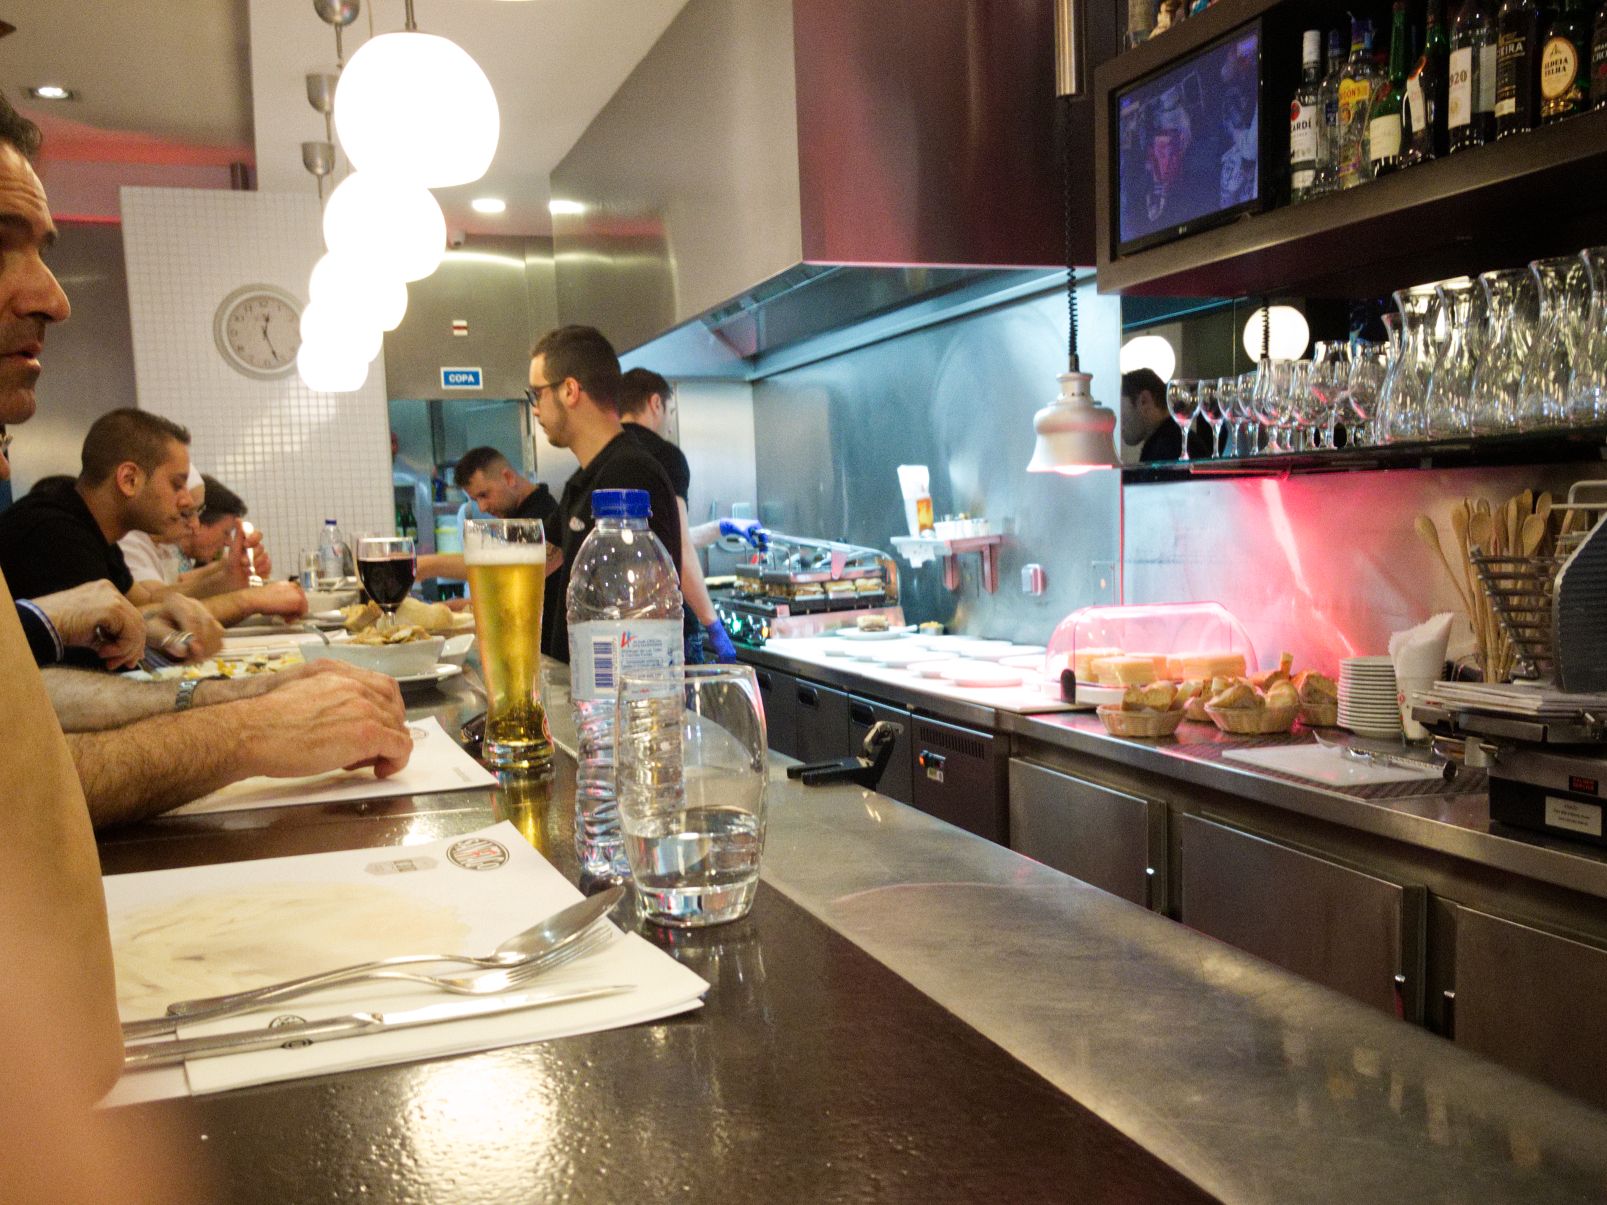 The Francesinhas are fried behind the counter, baked and then served to the hungry guests Café Santiago